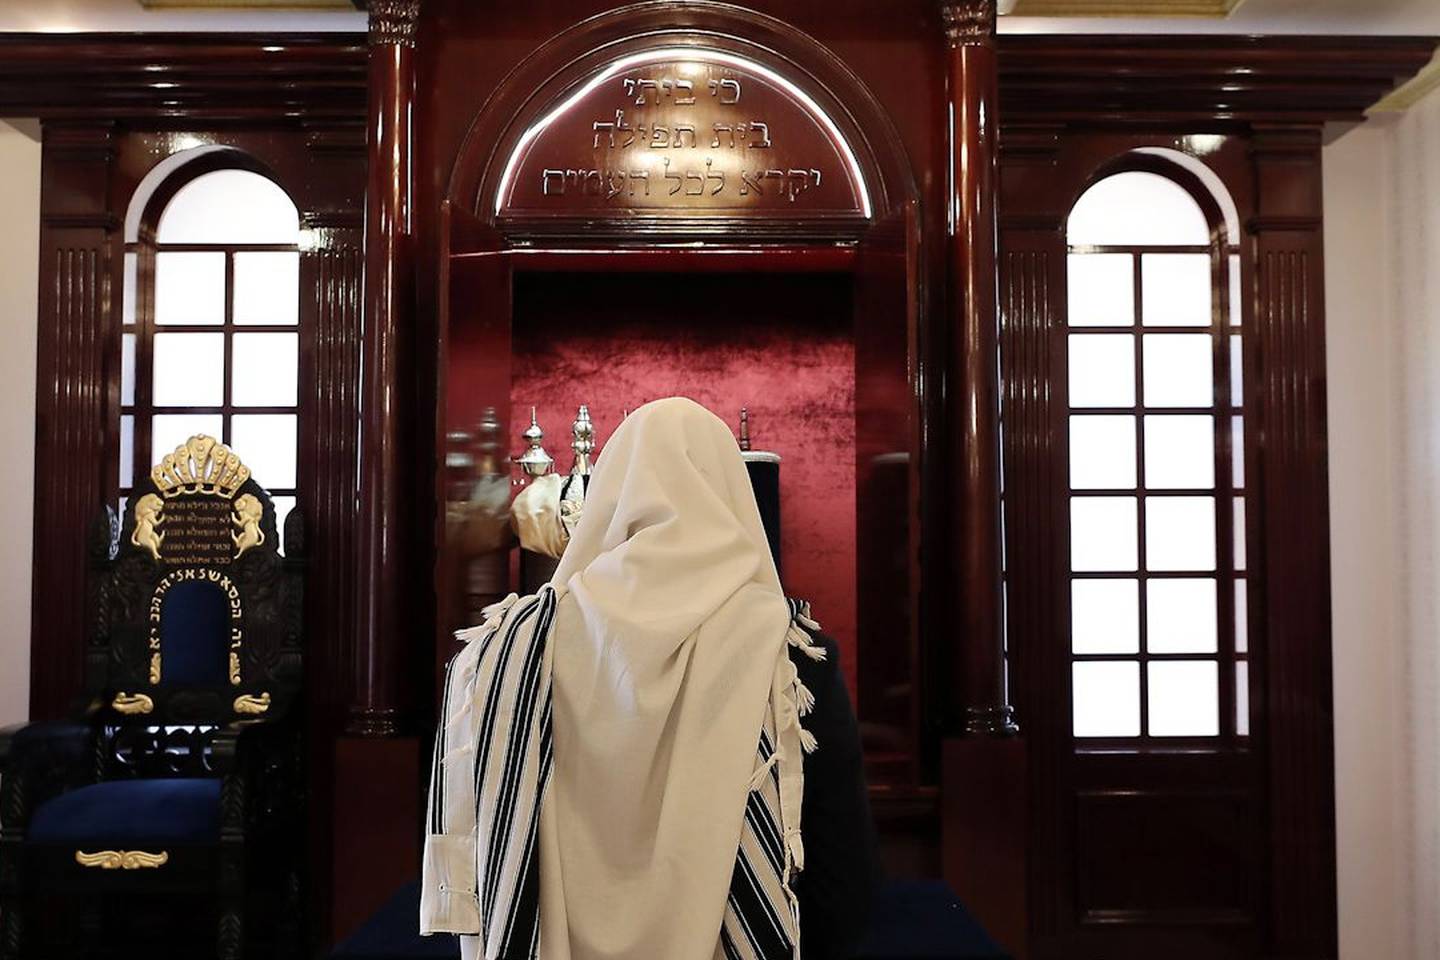 Take a look at the UAE's first Jewish community centre